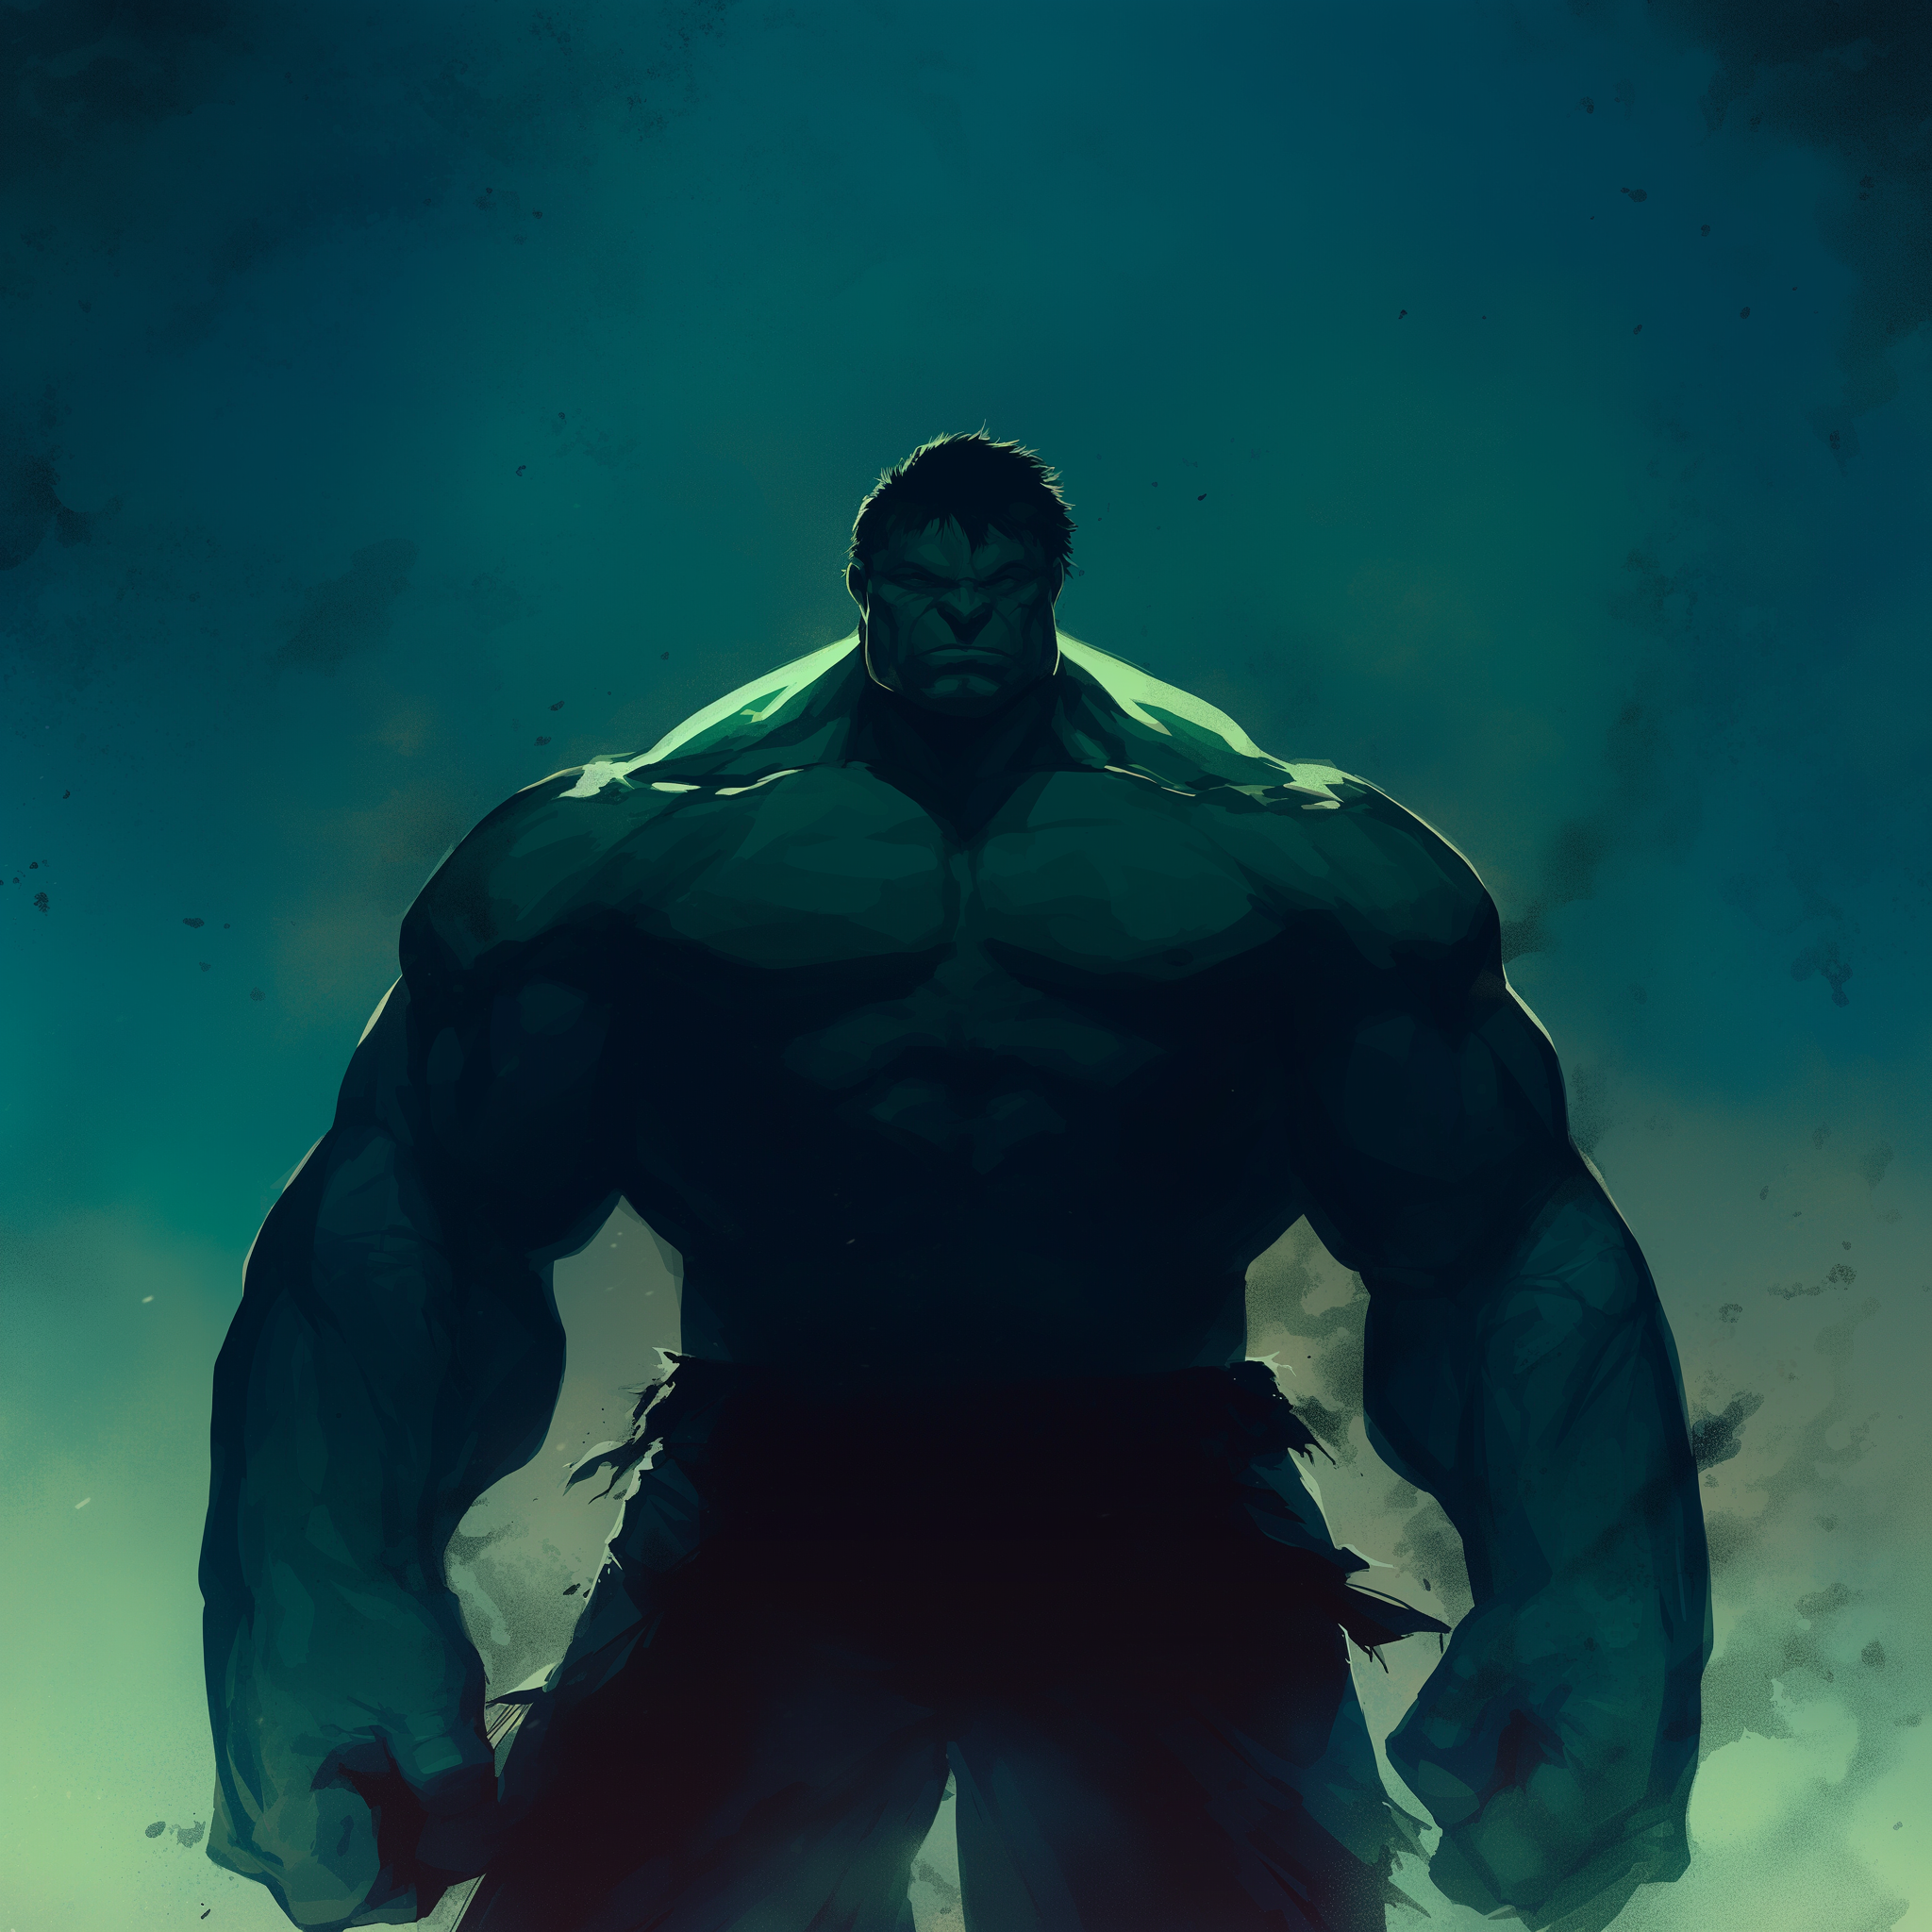 Avatar of the Hulk from Marvel Comics, showcasing his muscular silhouette against a moody blue background.